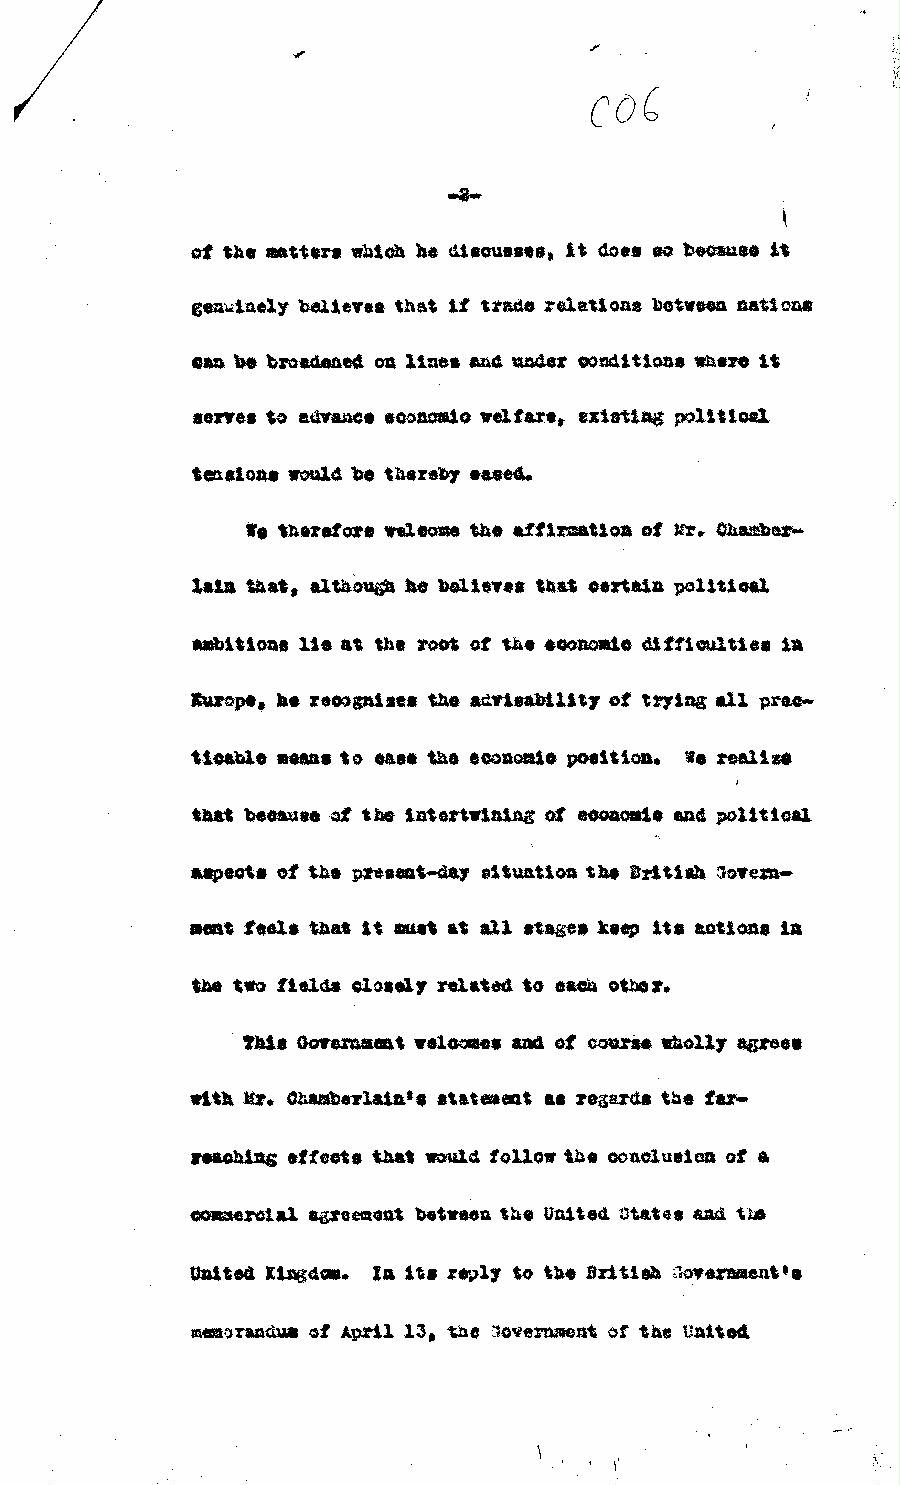 [a303c06.jpg] - Cont-memo from Dept. of State5/28/37